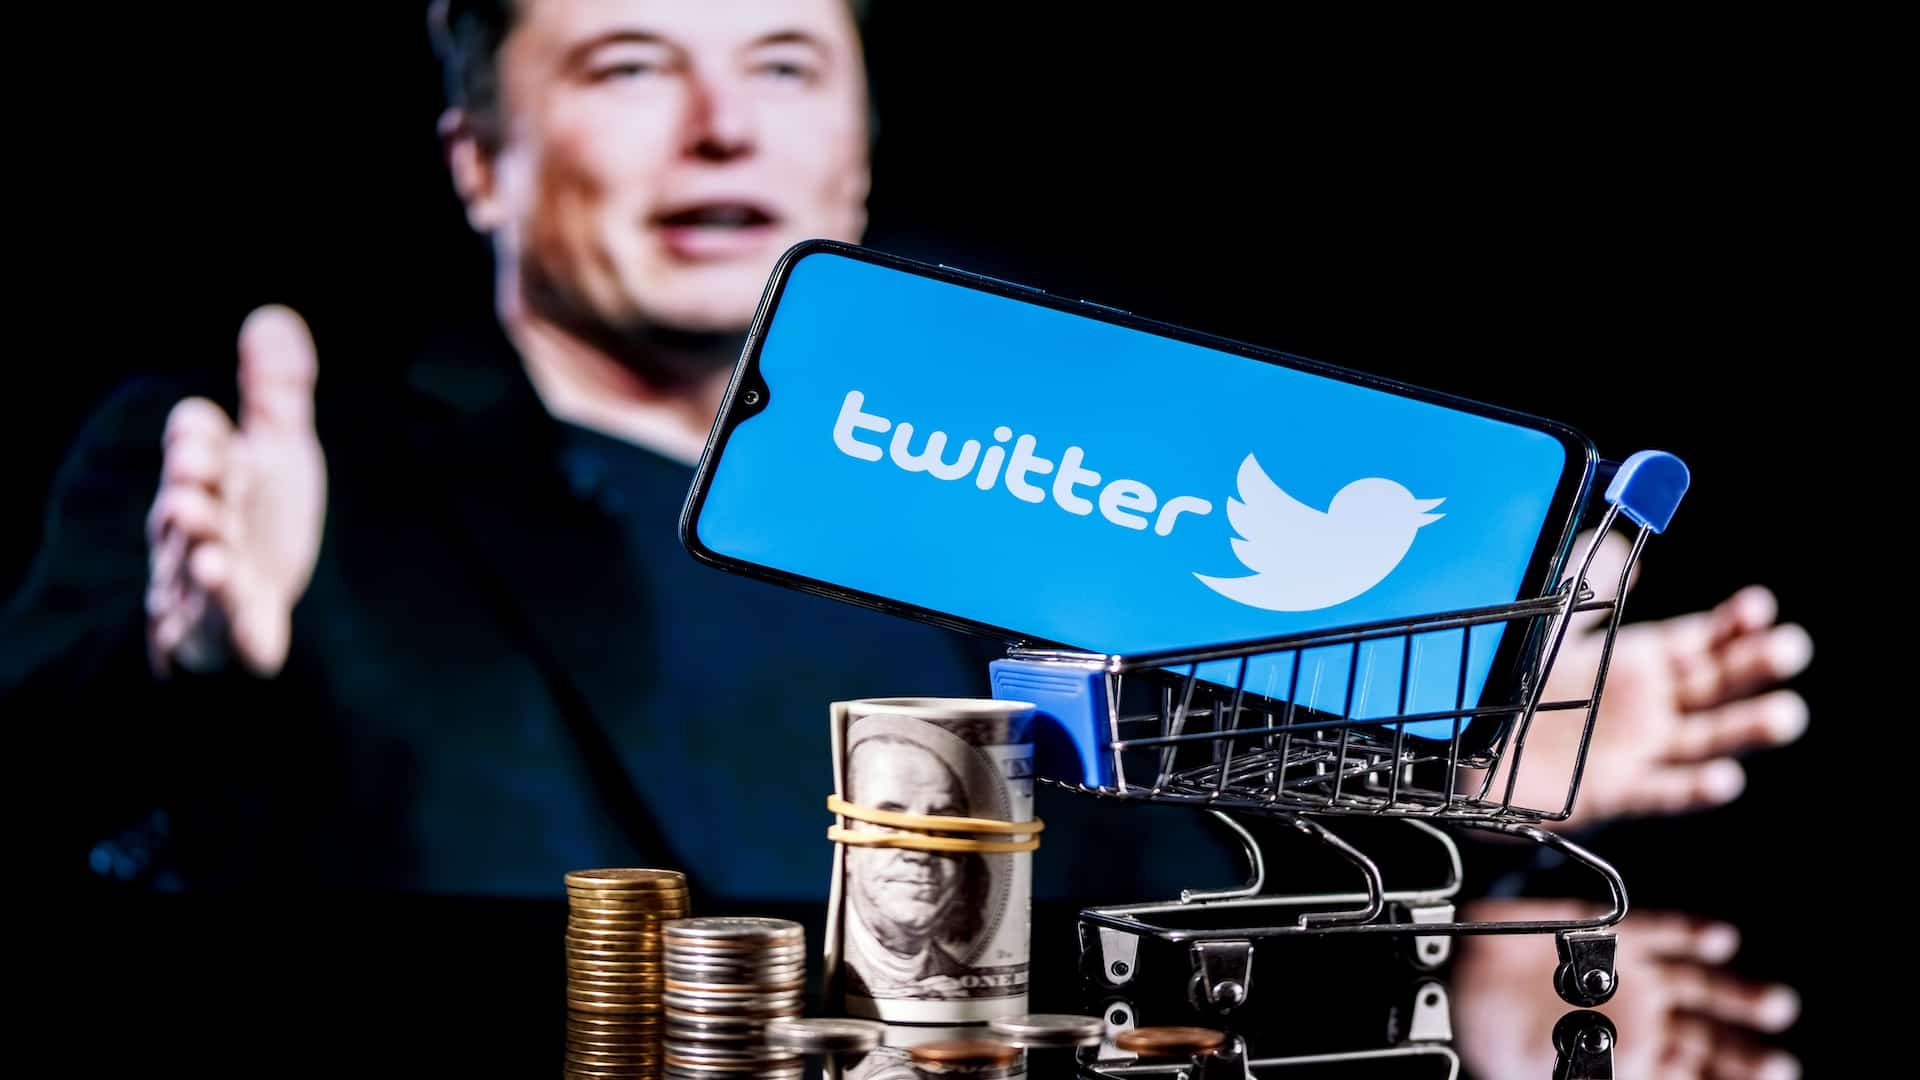 X (Twitter) fails to send ad revenue sharing payouts on time